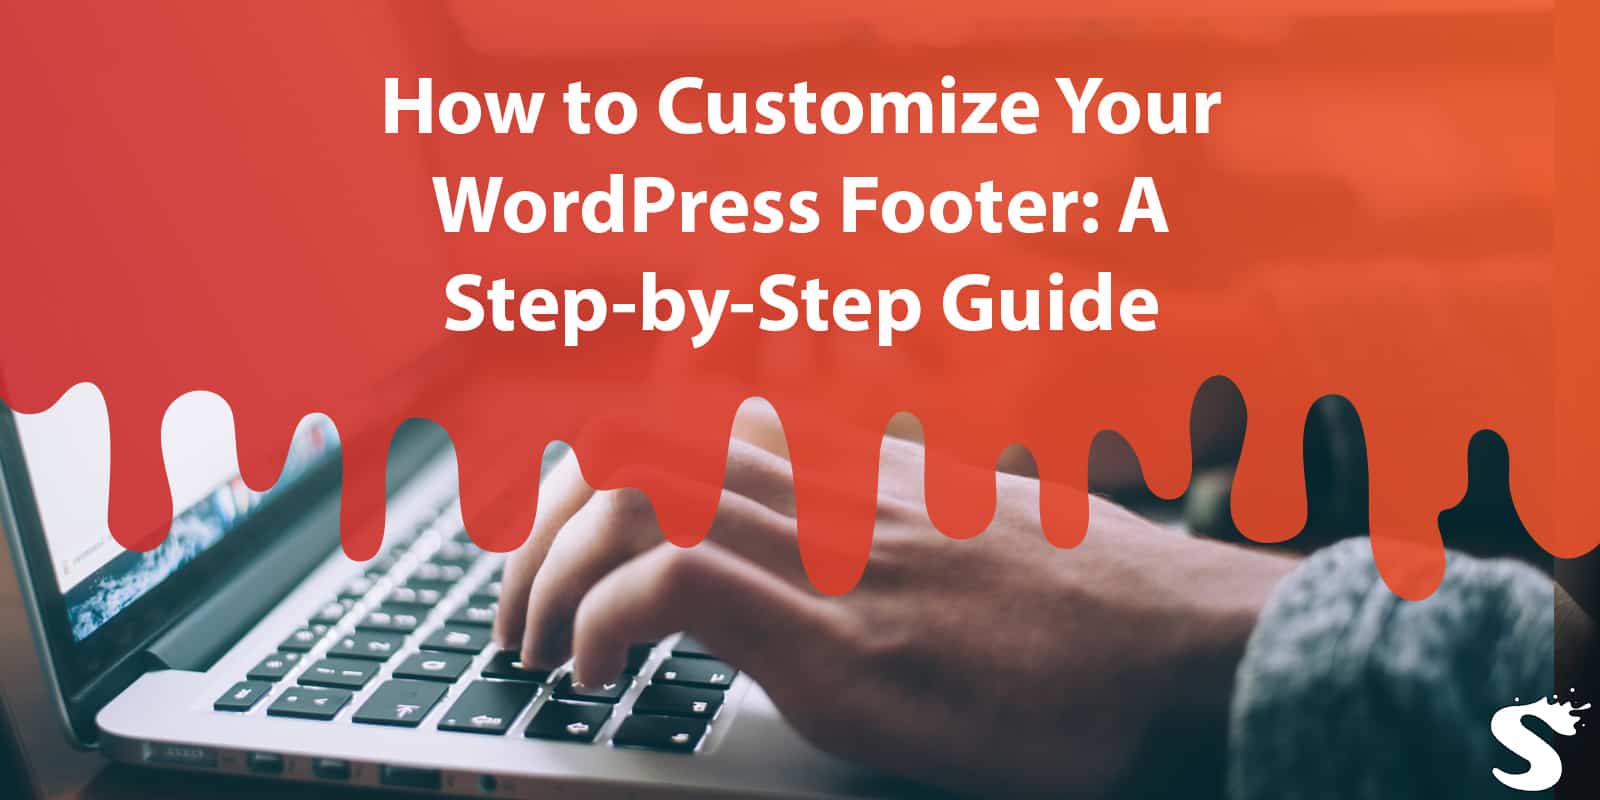 How to Customize Your WordPress Footer: A Step-by-Step Guide